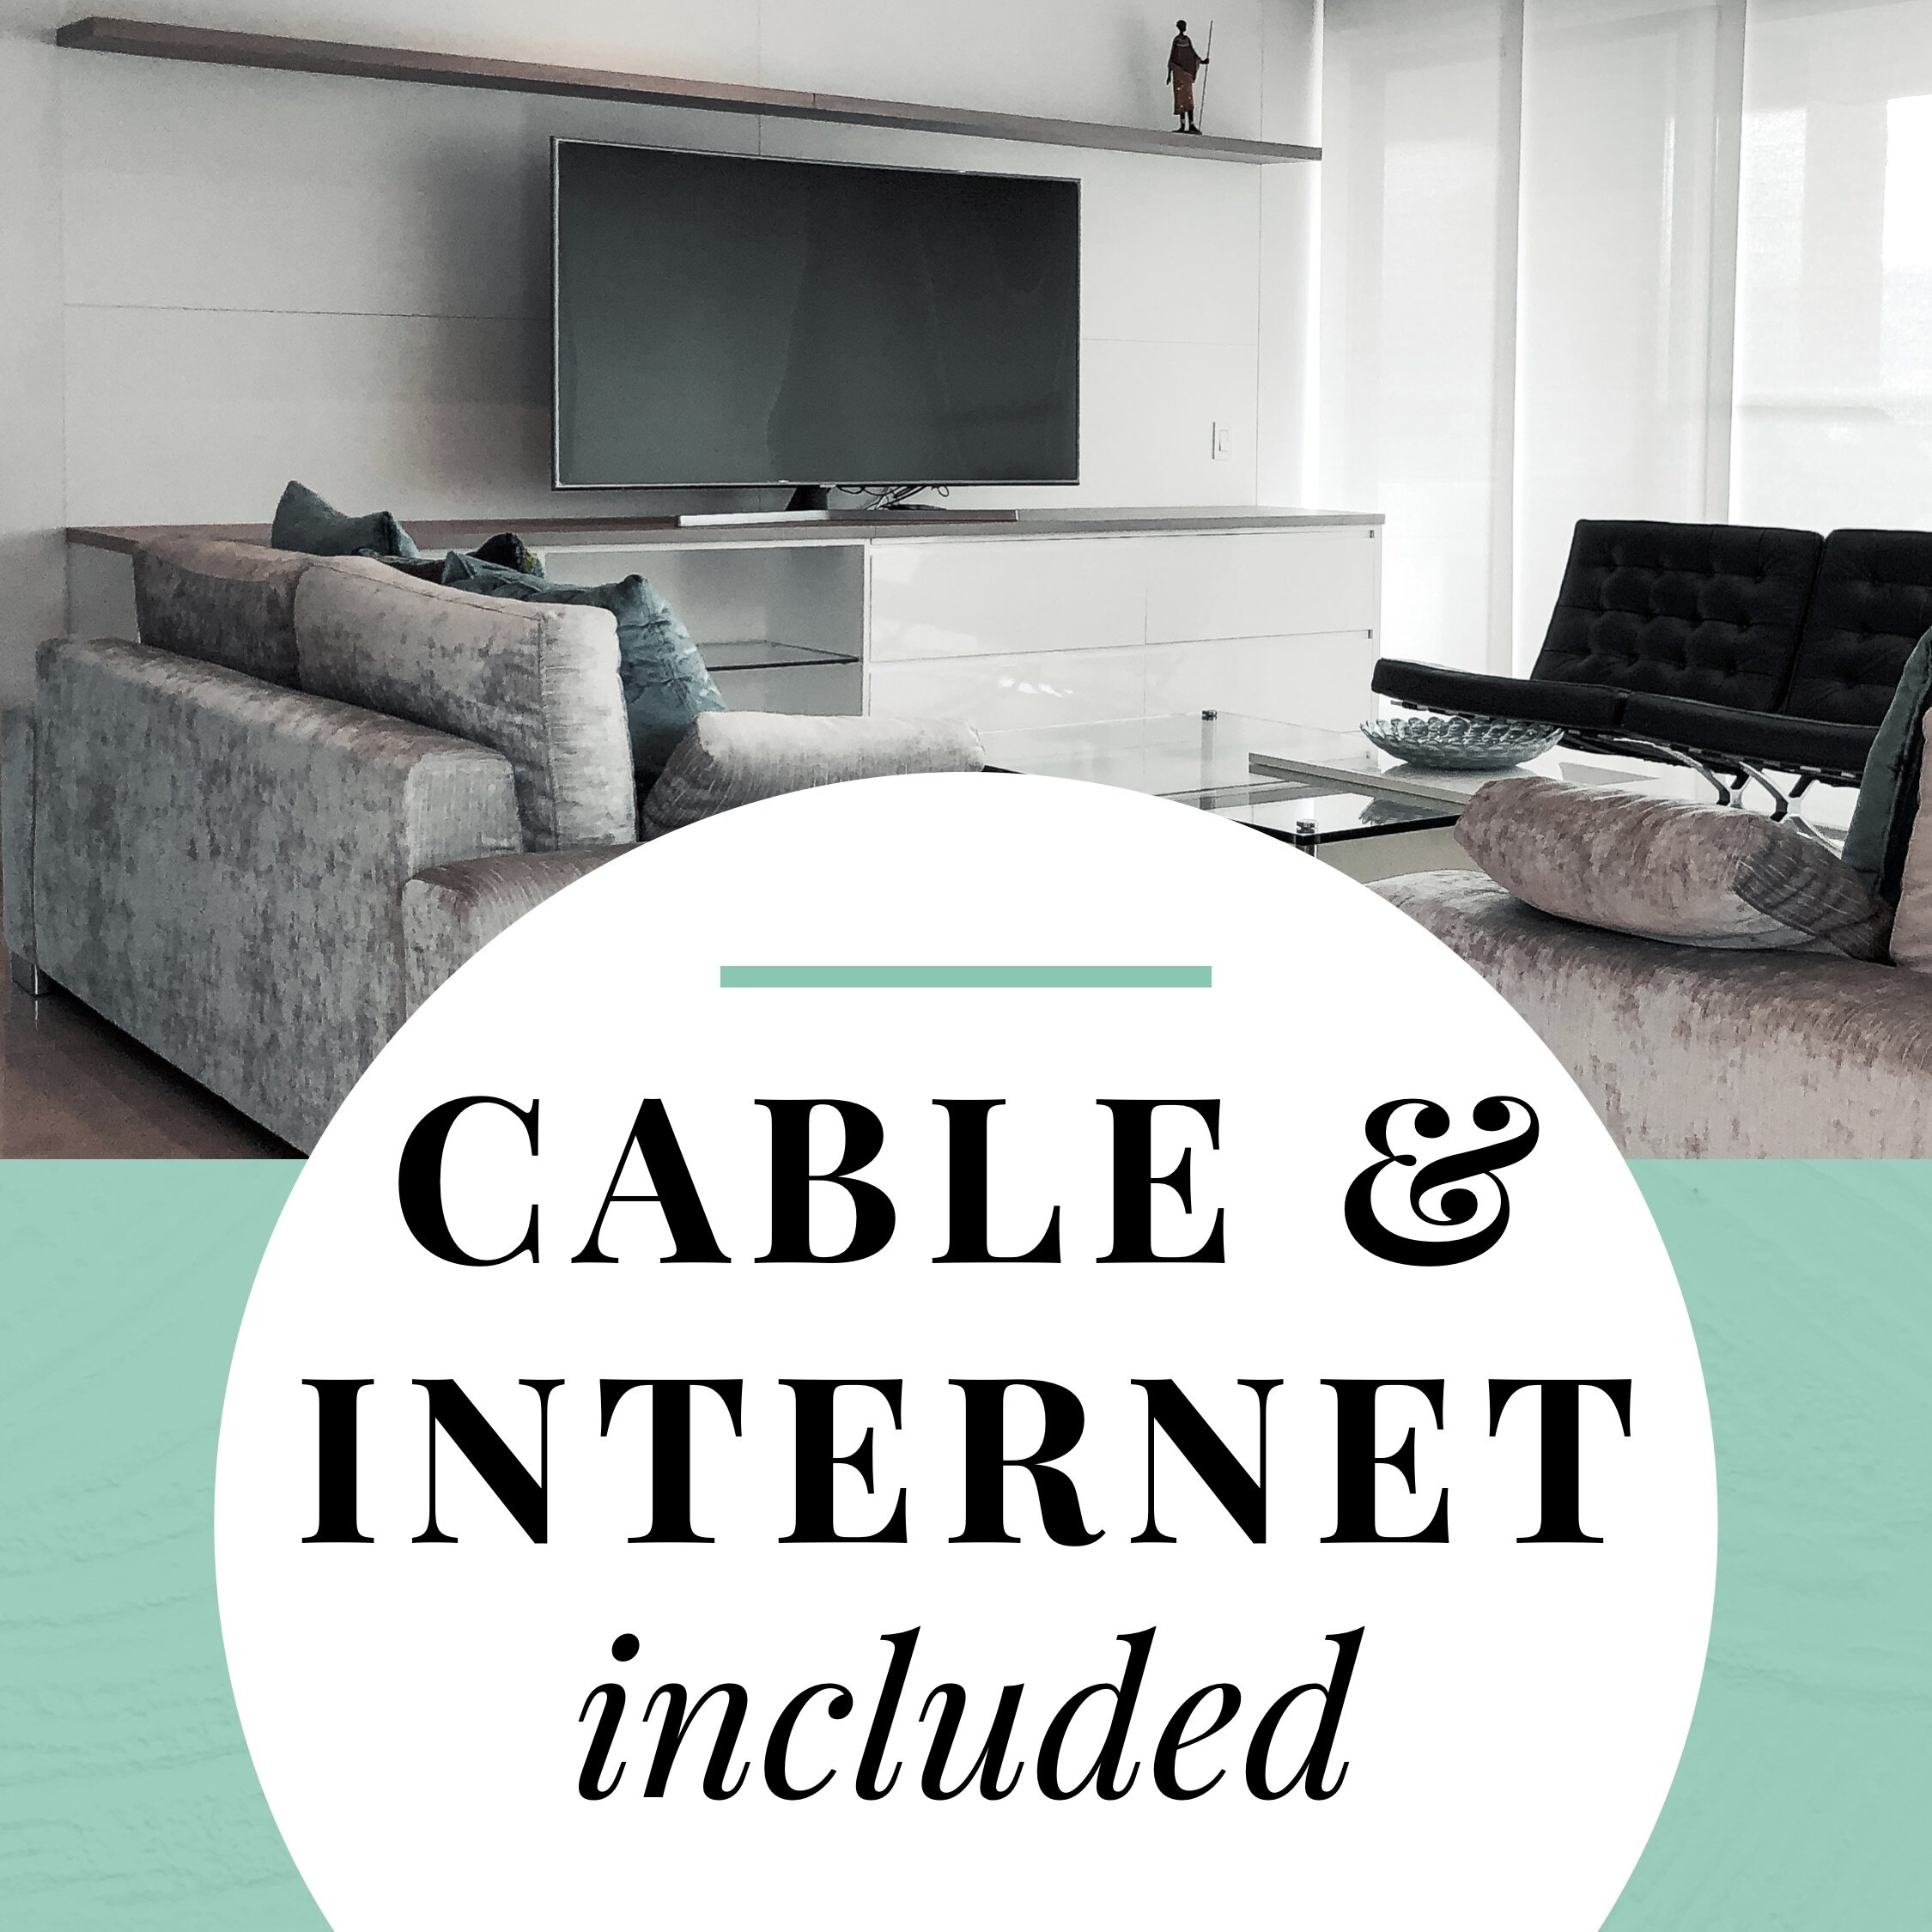 IG7488-Cable Internet Included Digital Graphic.jpg